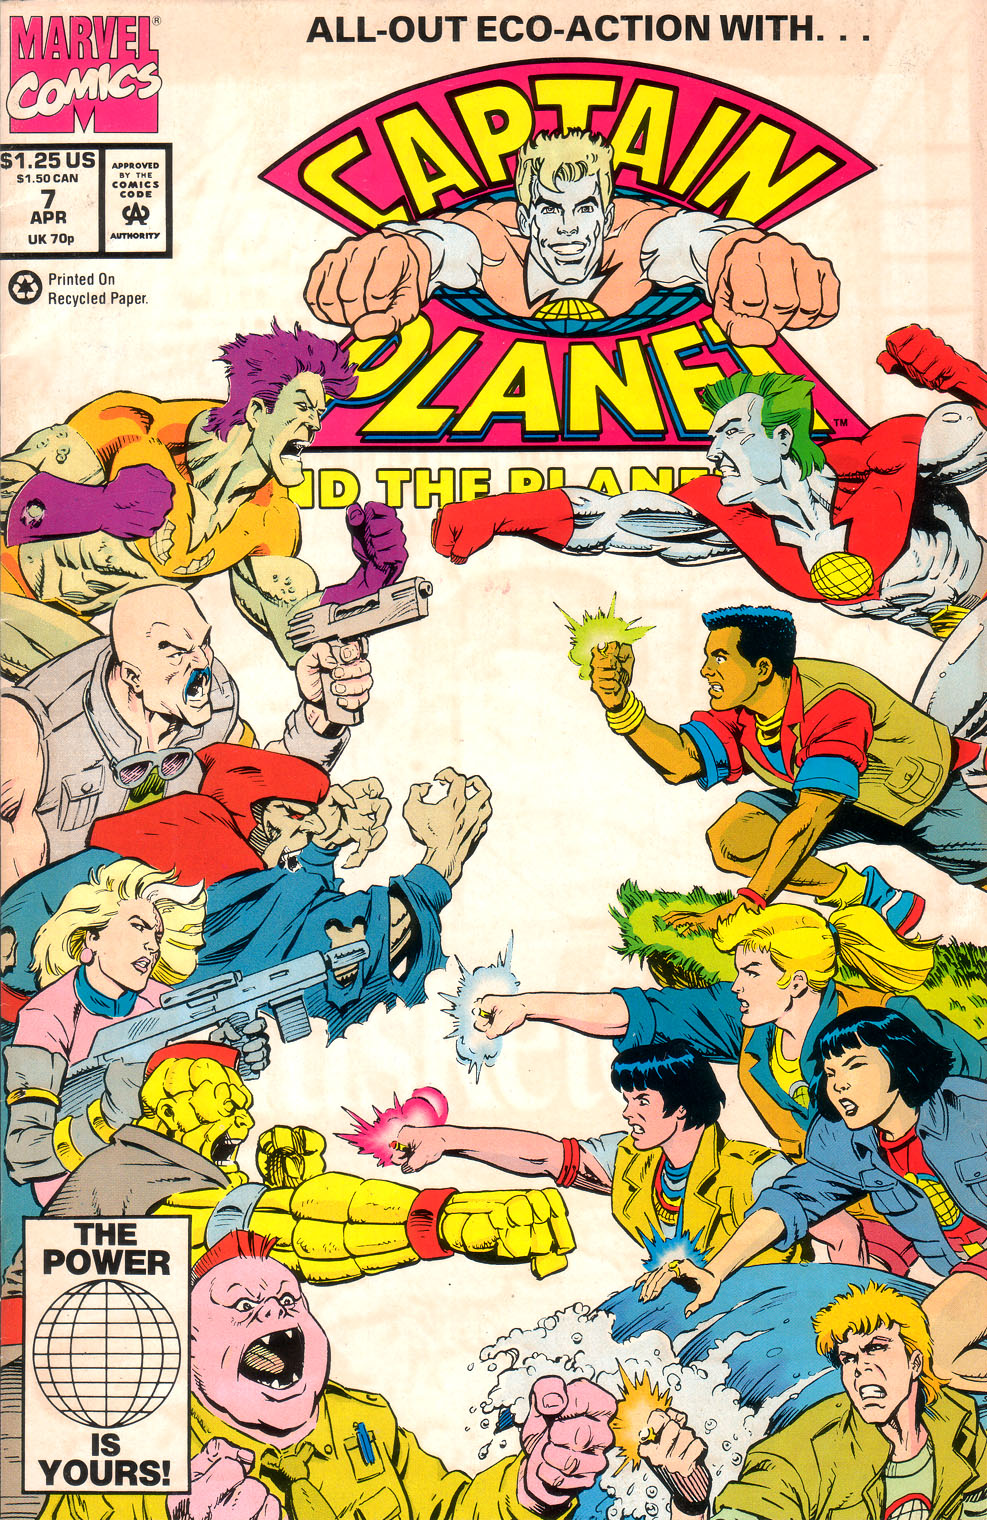 Shemale Captain Planet - Captain Planet And The Planeteers Issue 7 | Read Captain Planet And The  Planeteers Issue 7 comic online in high quality. Read Full Comic online for  free - Read comics online in high quality .